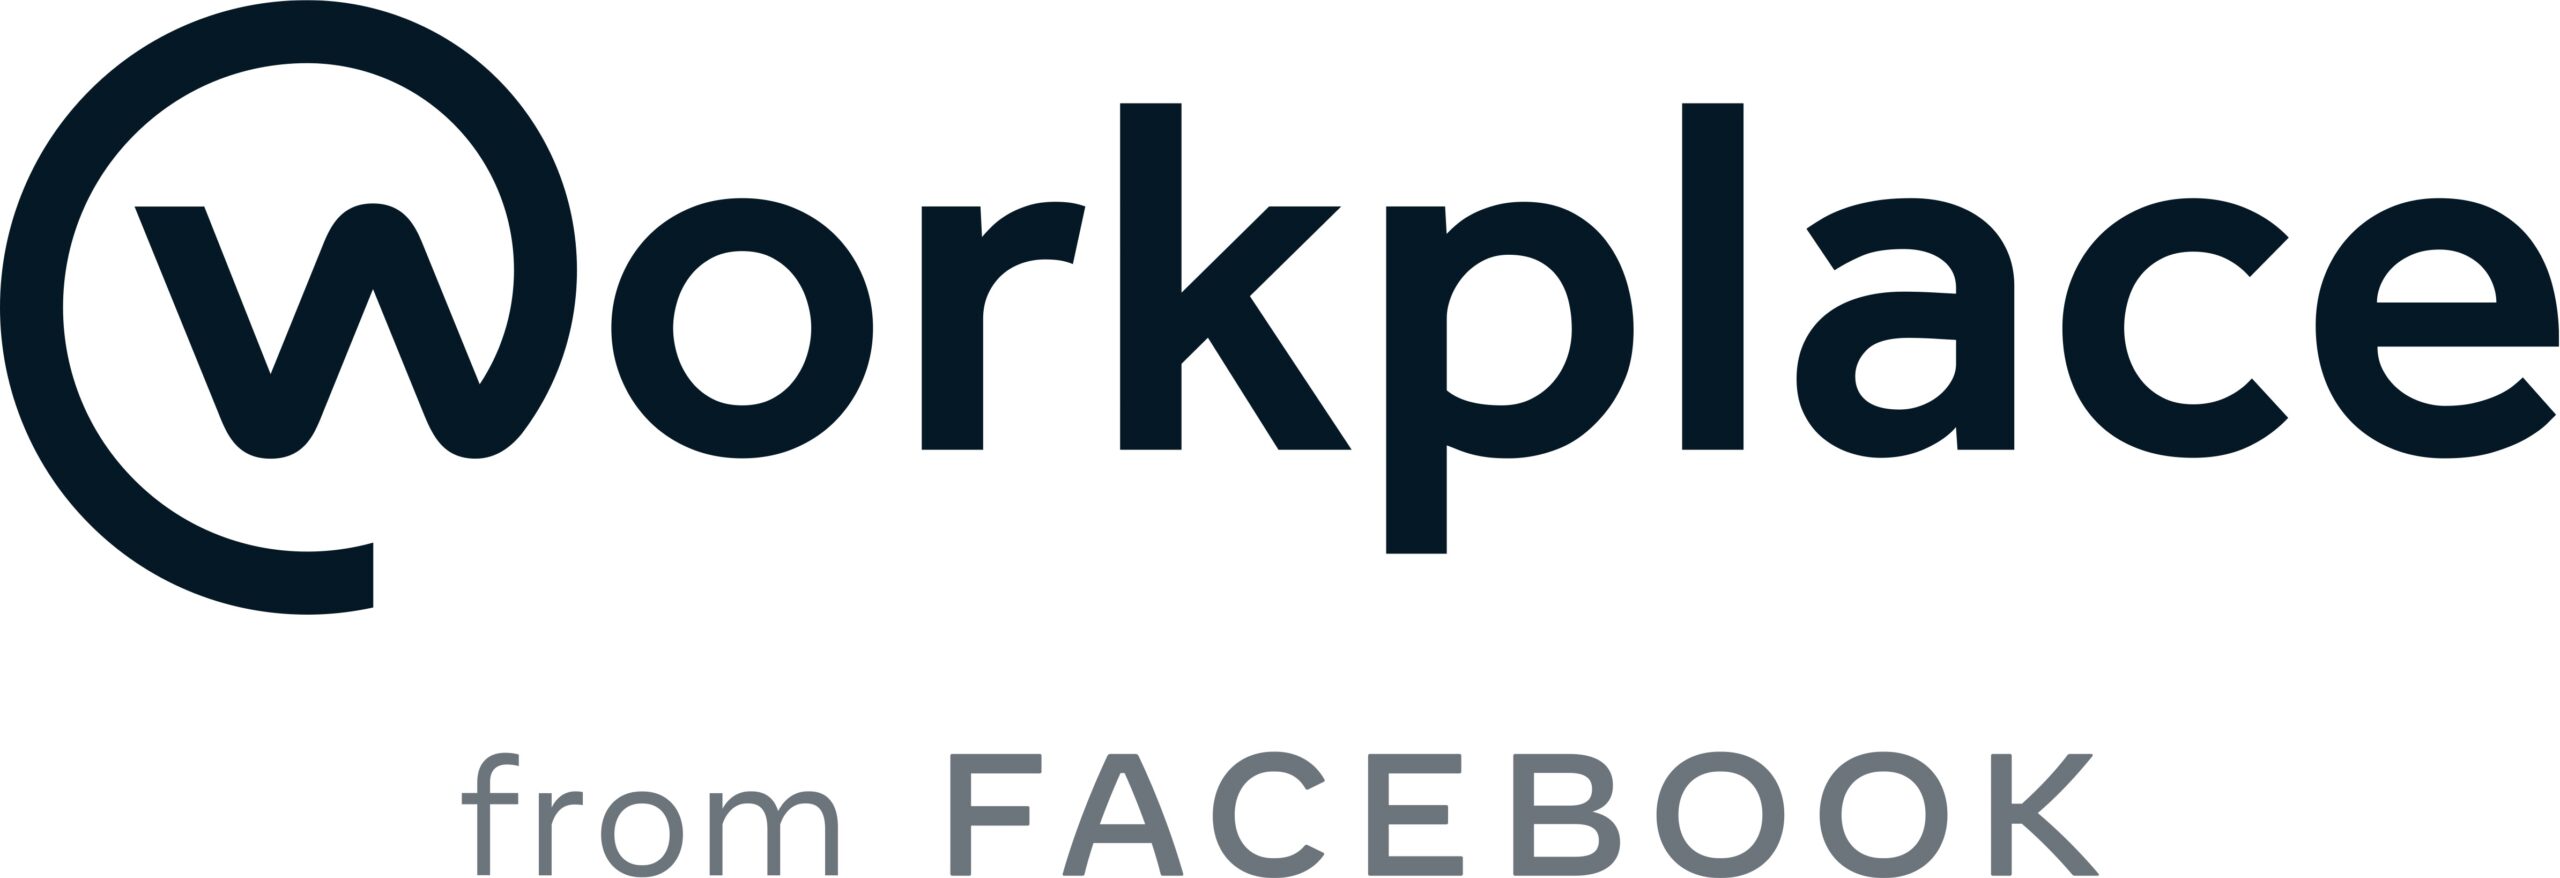 Workplace by Facebook logo